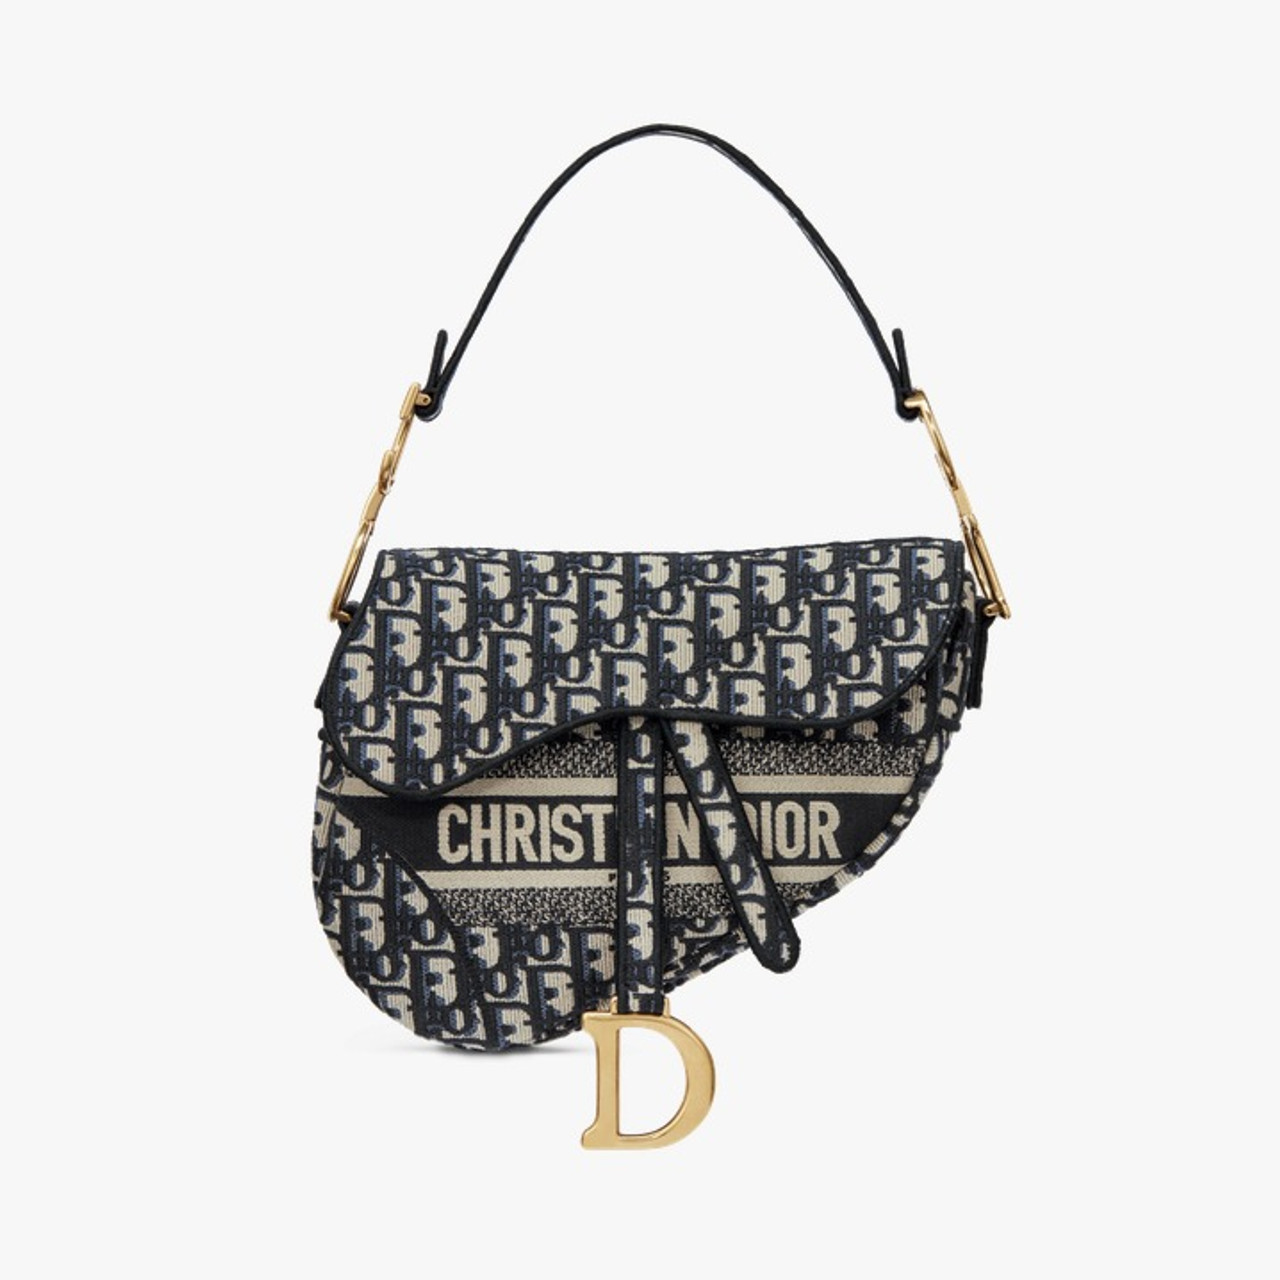 An Honest Dior Saddle Bag Review  How to Style  Le Travel Style